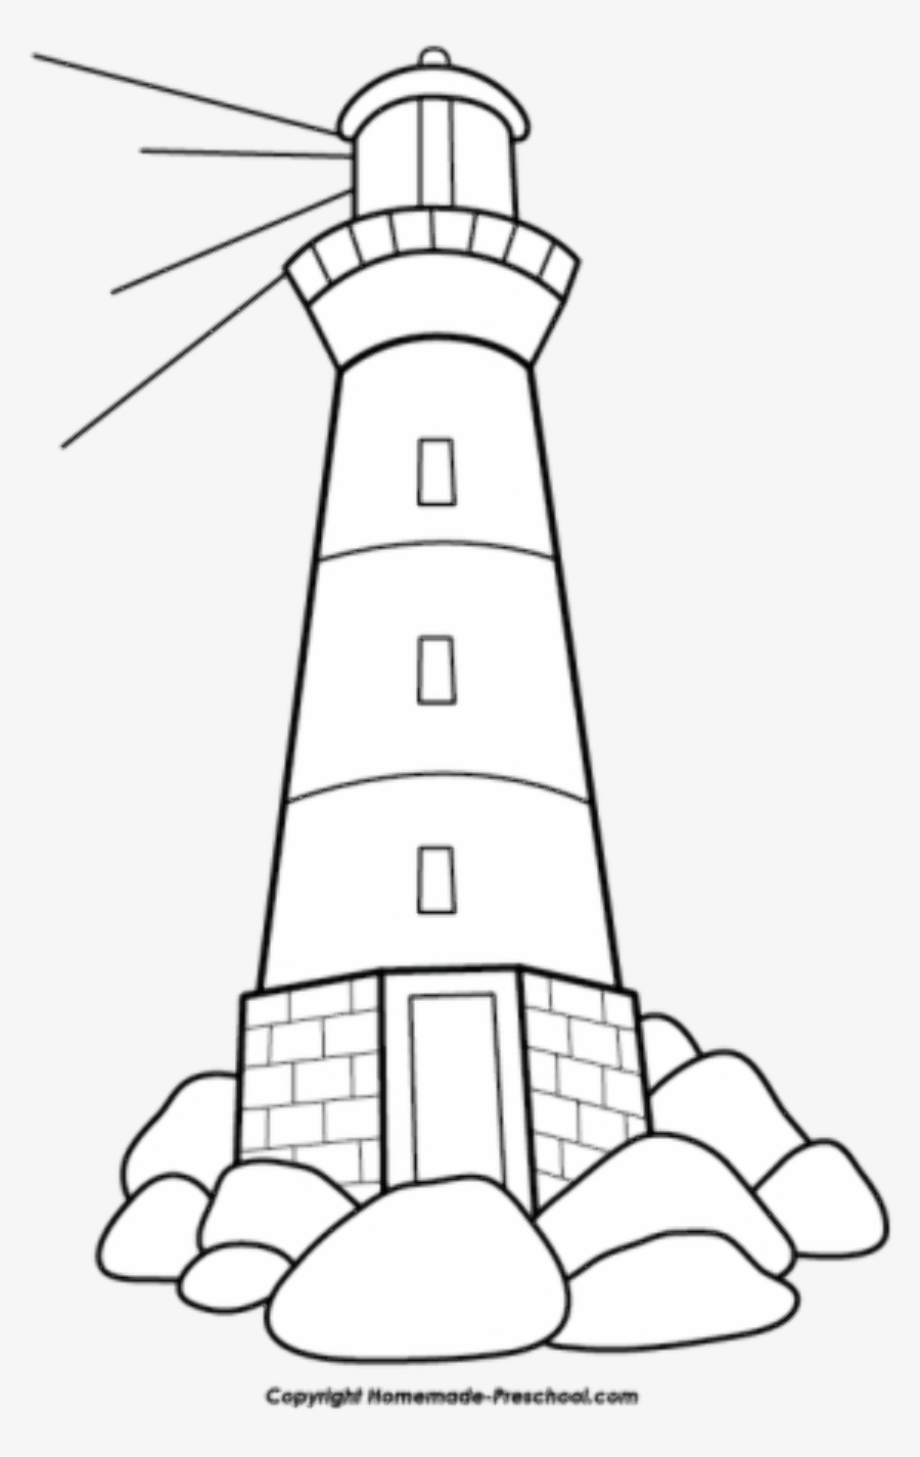 Printable Pictures Of Lighthouses - Printable World Holiday